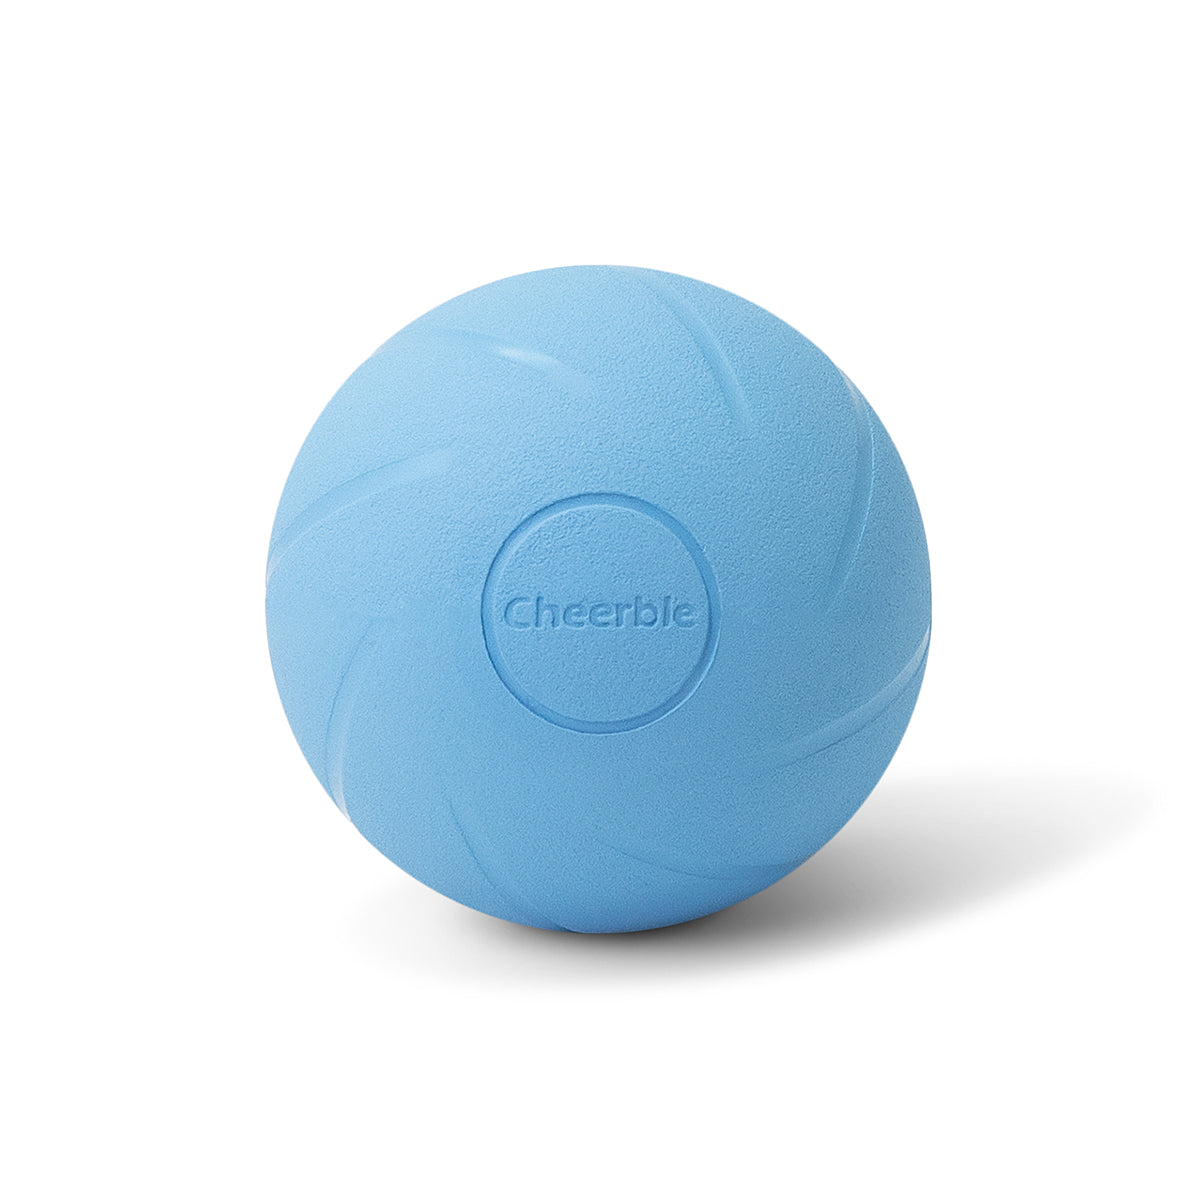 Cheerble's Wicked Ball is a smart toy that likes to play games